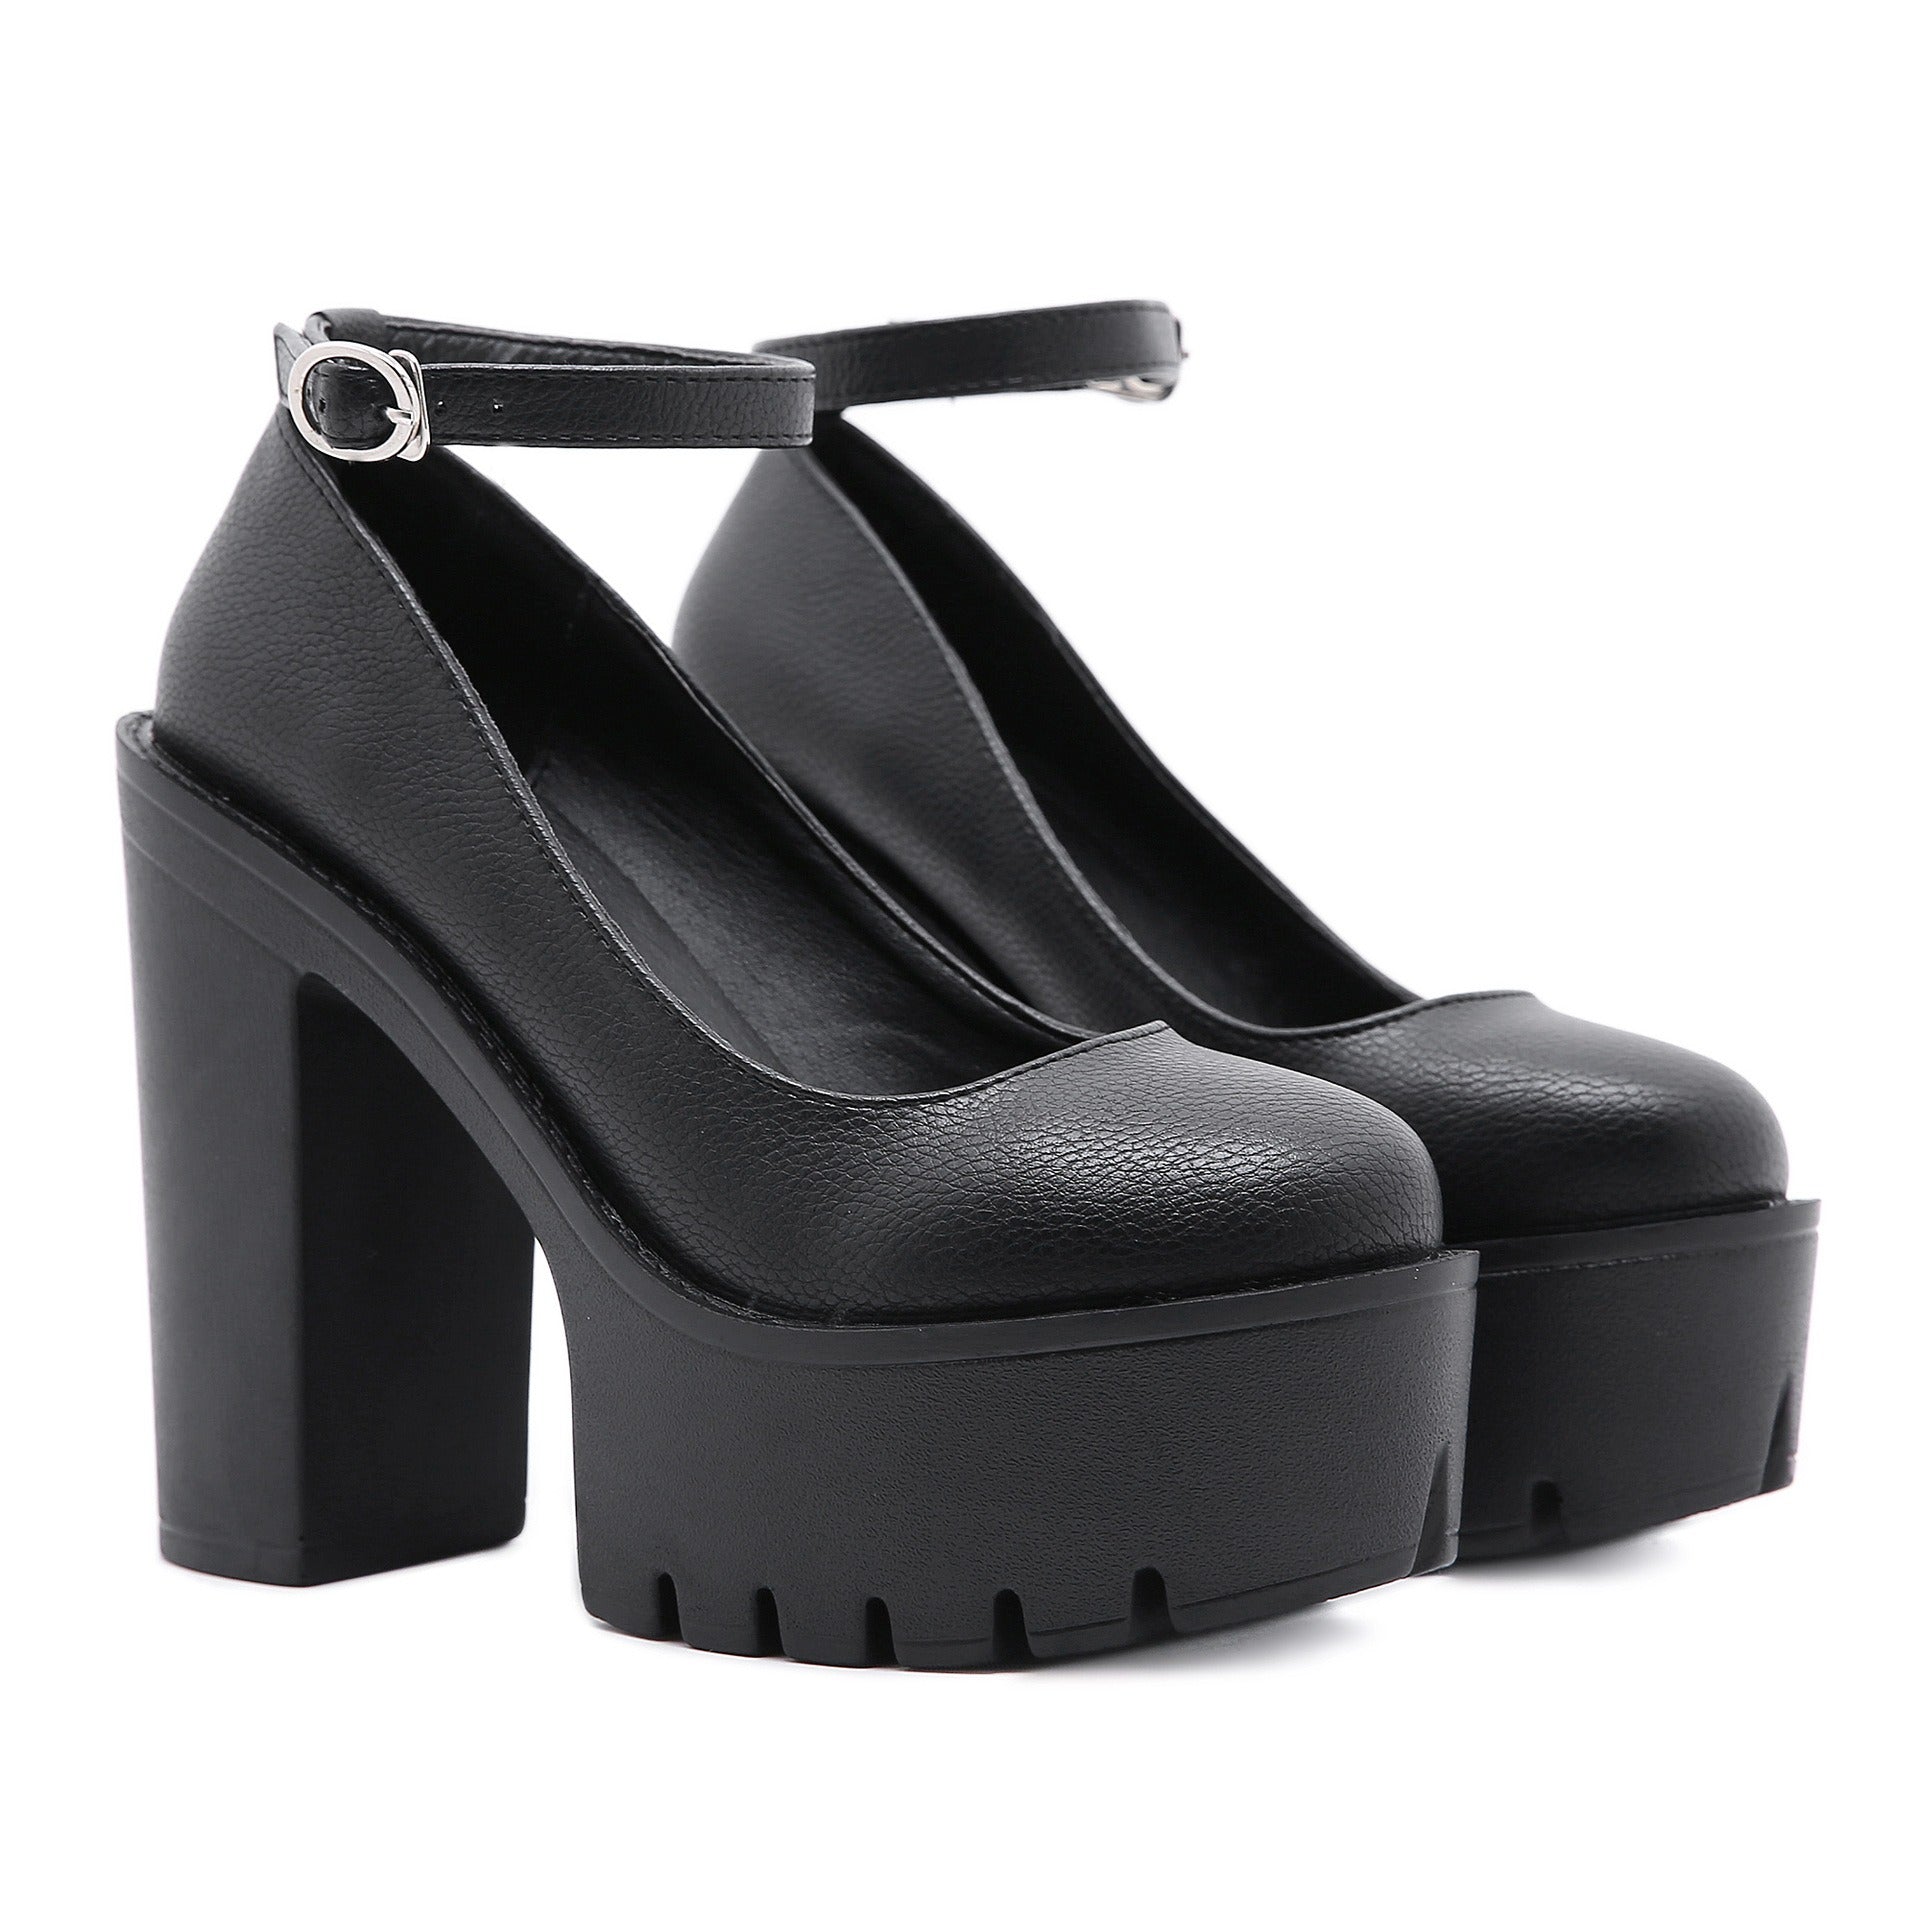 Fashion Gothic Style Patent Leather Platform Super Sexy Nightclub High Heels  Hollow Buckled Zip Women039s Ankle Boots Sandals577839349911 From Fgyo,  $121.04 | DHgate.Com